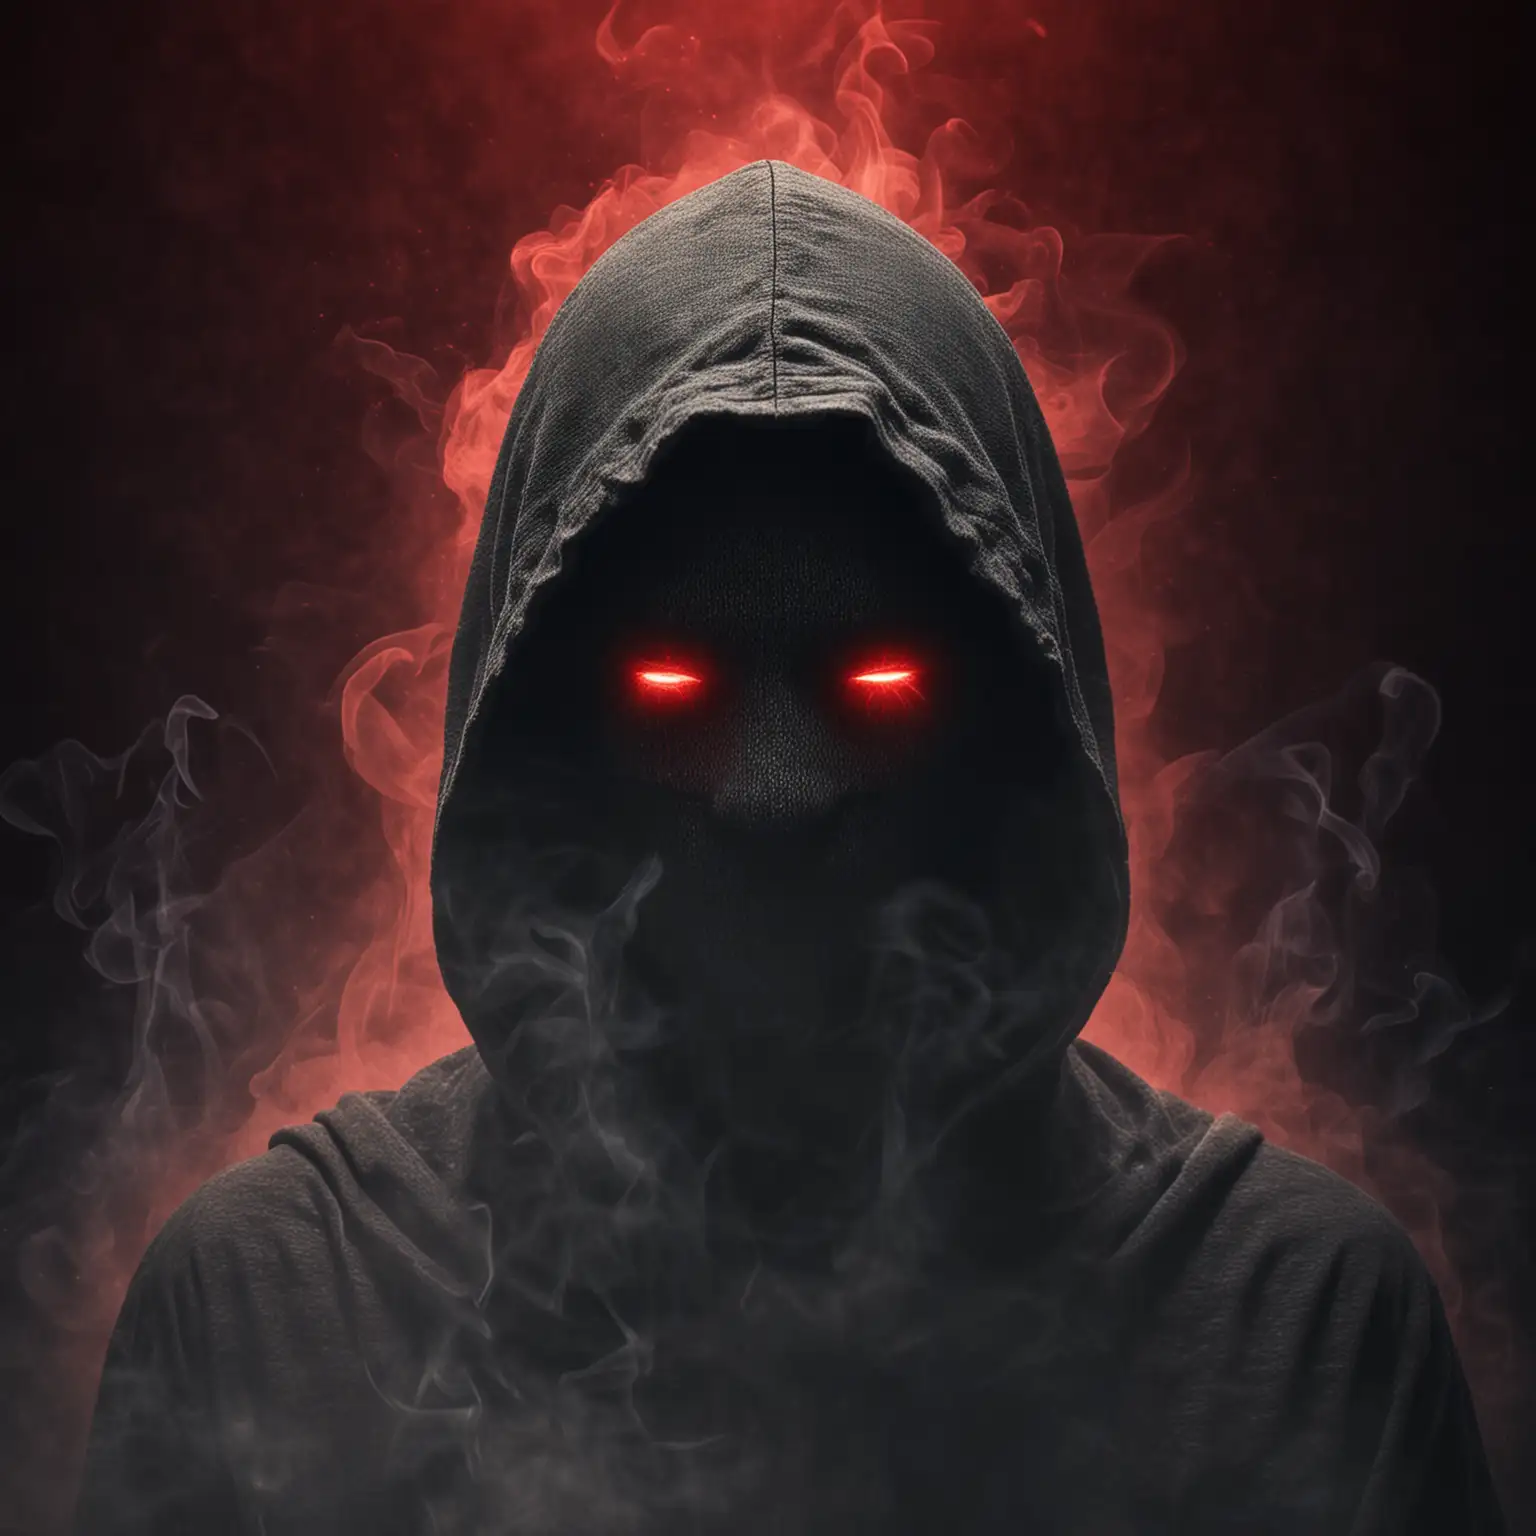 Enigmatic Figure with Hooded Silhouette and Glowing Red Eyes in Smoky Ambiance